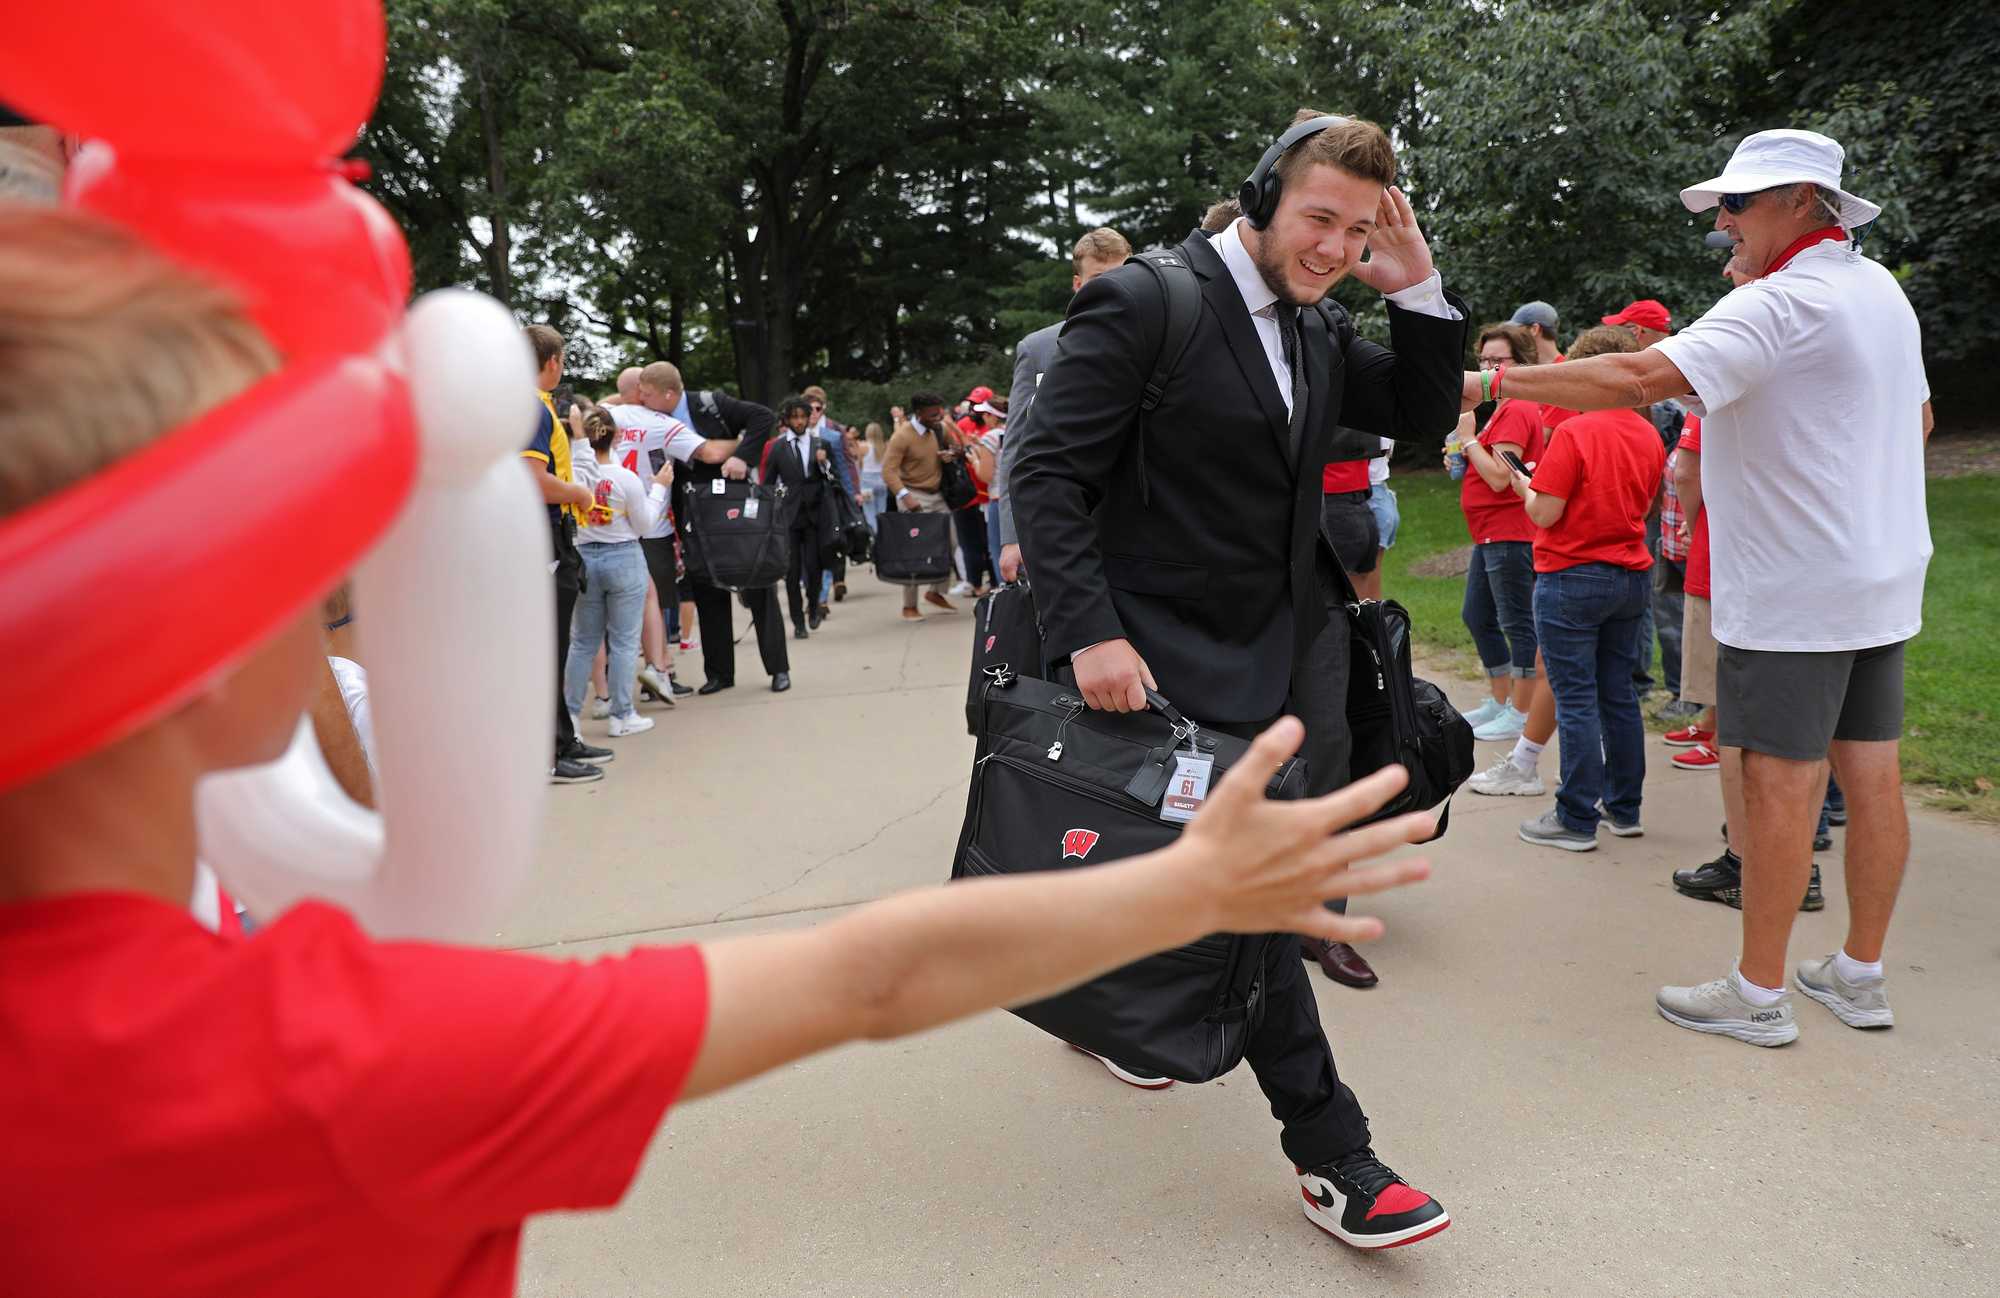 Wisconsin players and coaches walked through a welcoming reception line onto campus before the game.